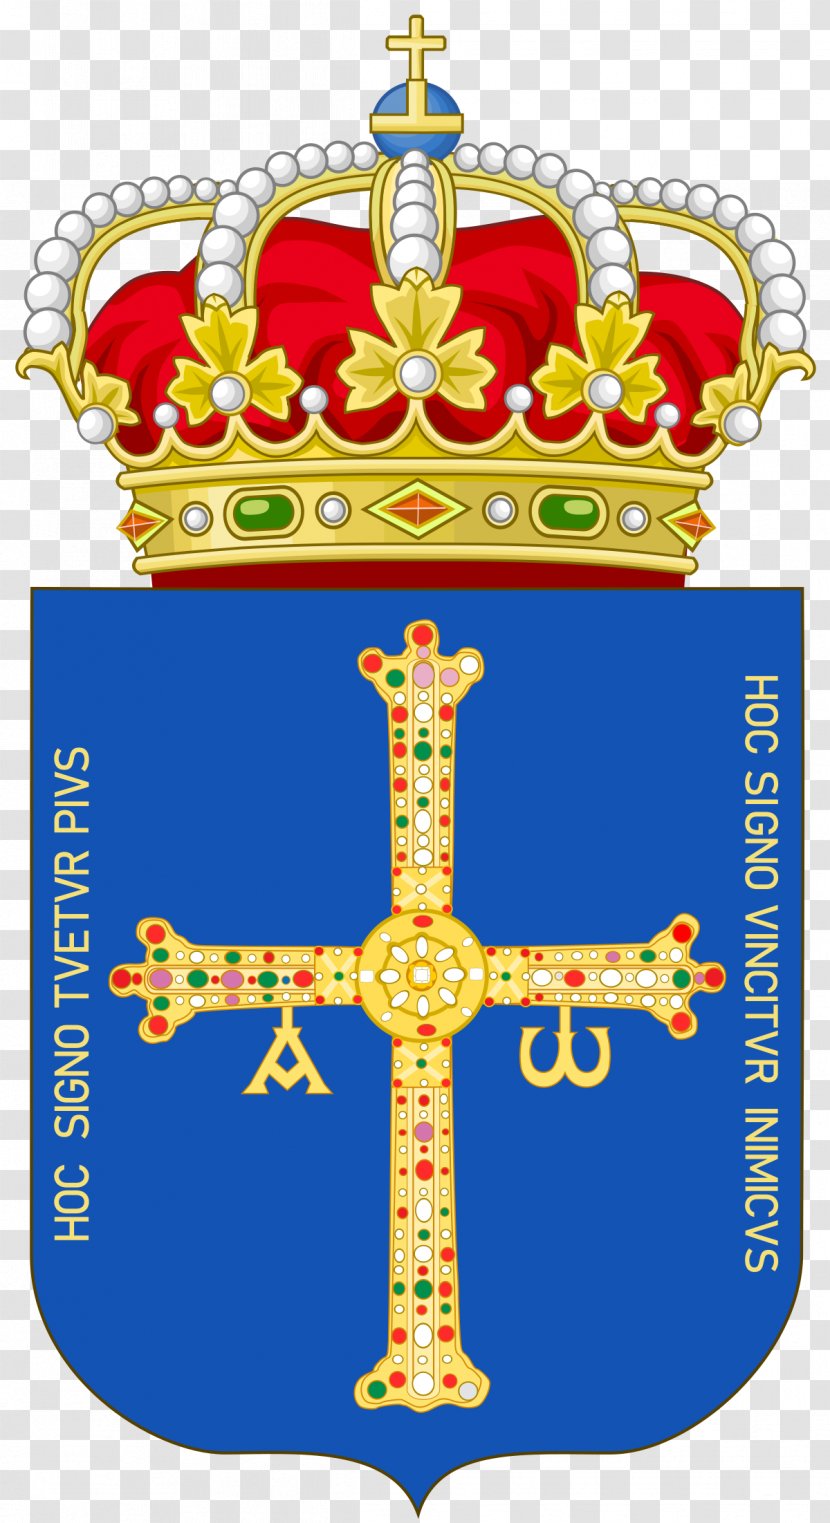 Kingdom Of Asturias Victory Cross Coat Arms - Spain - Enlightenment Transparent PNG